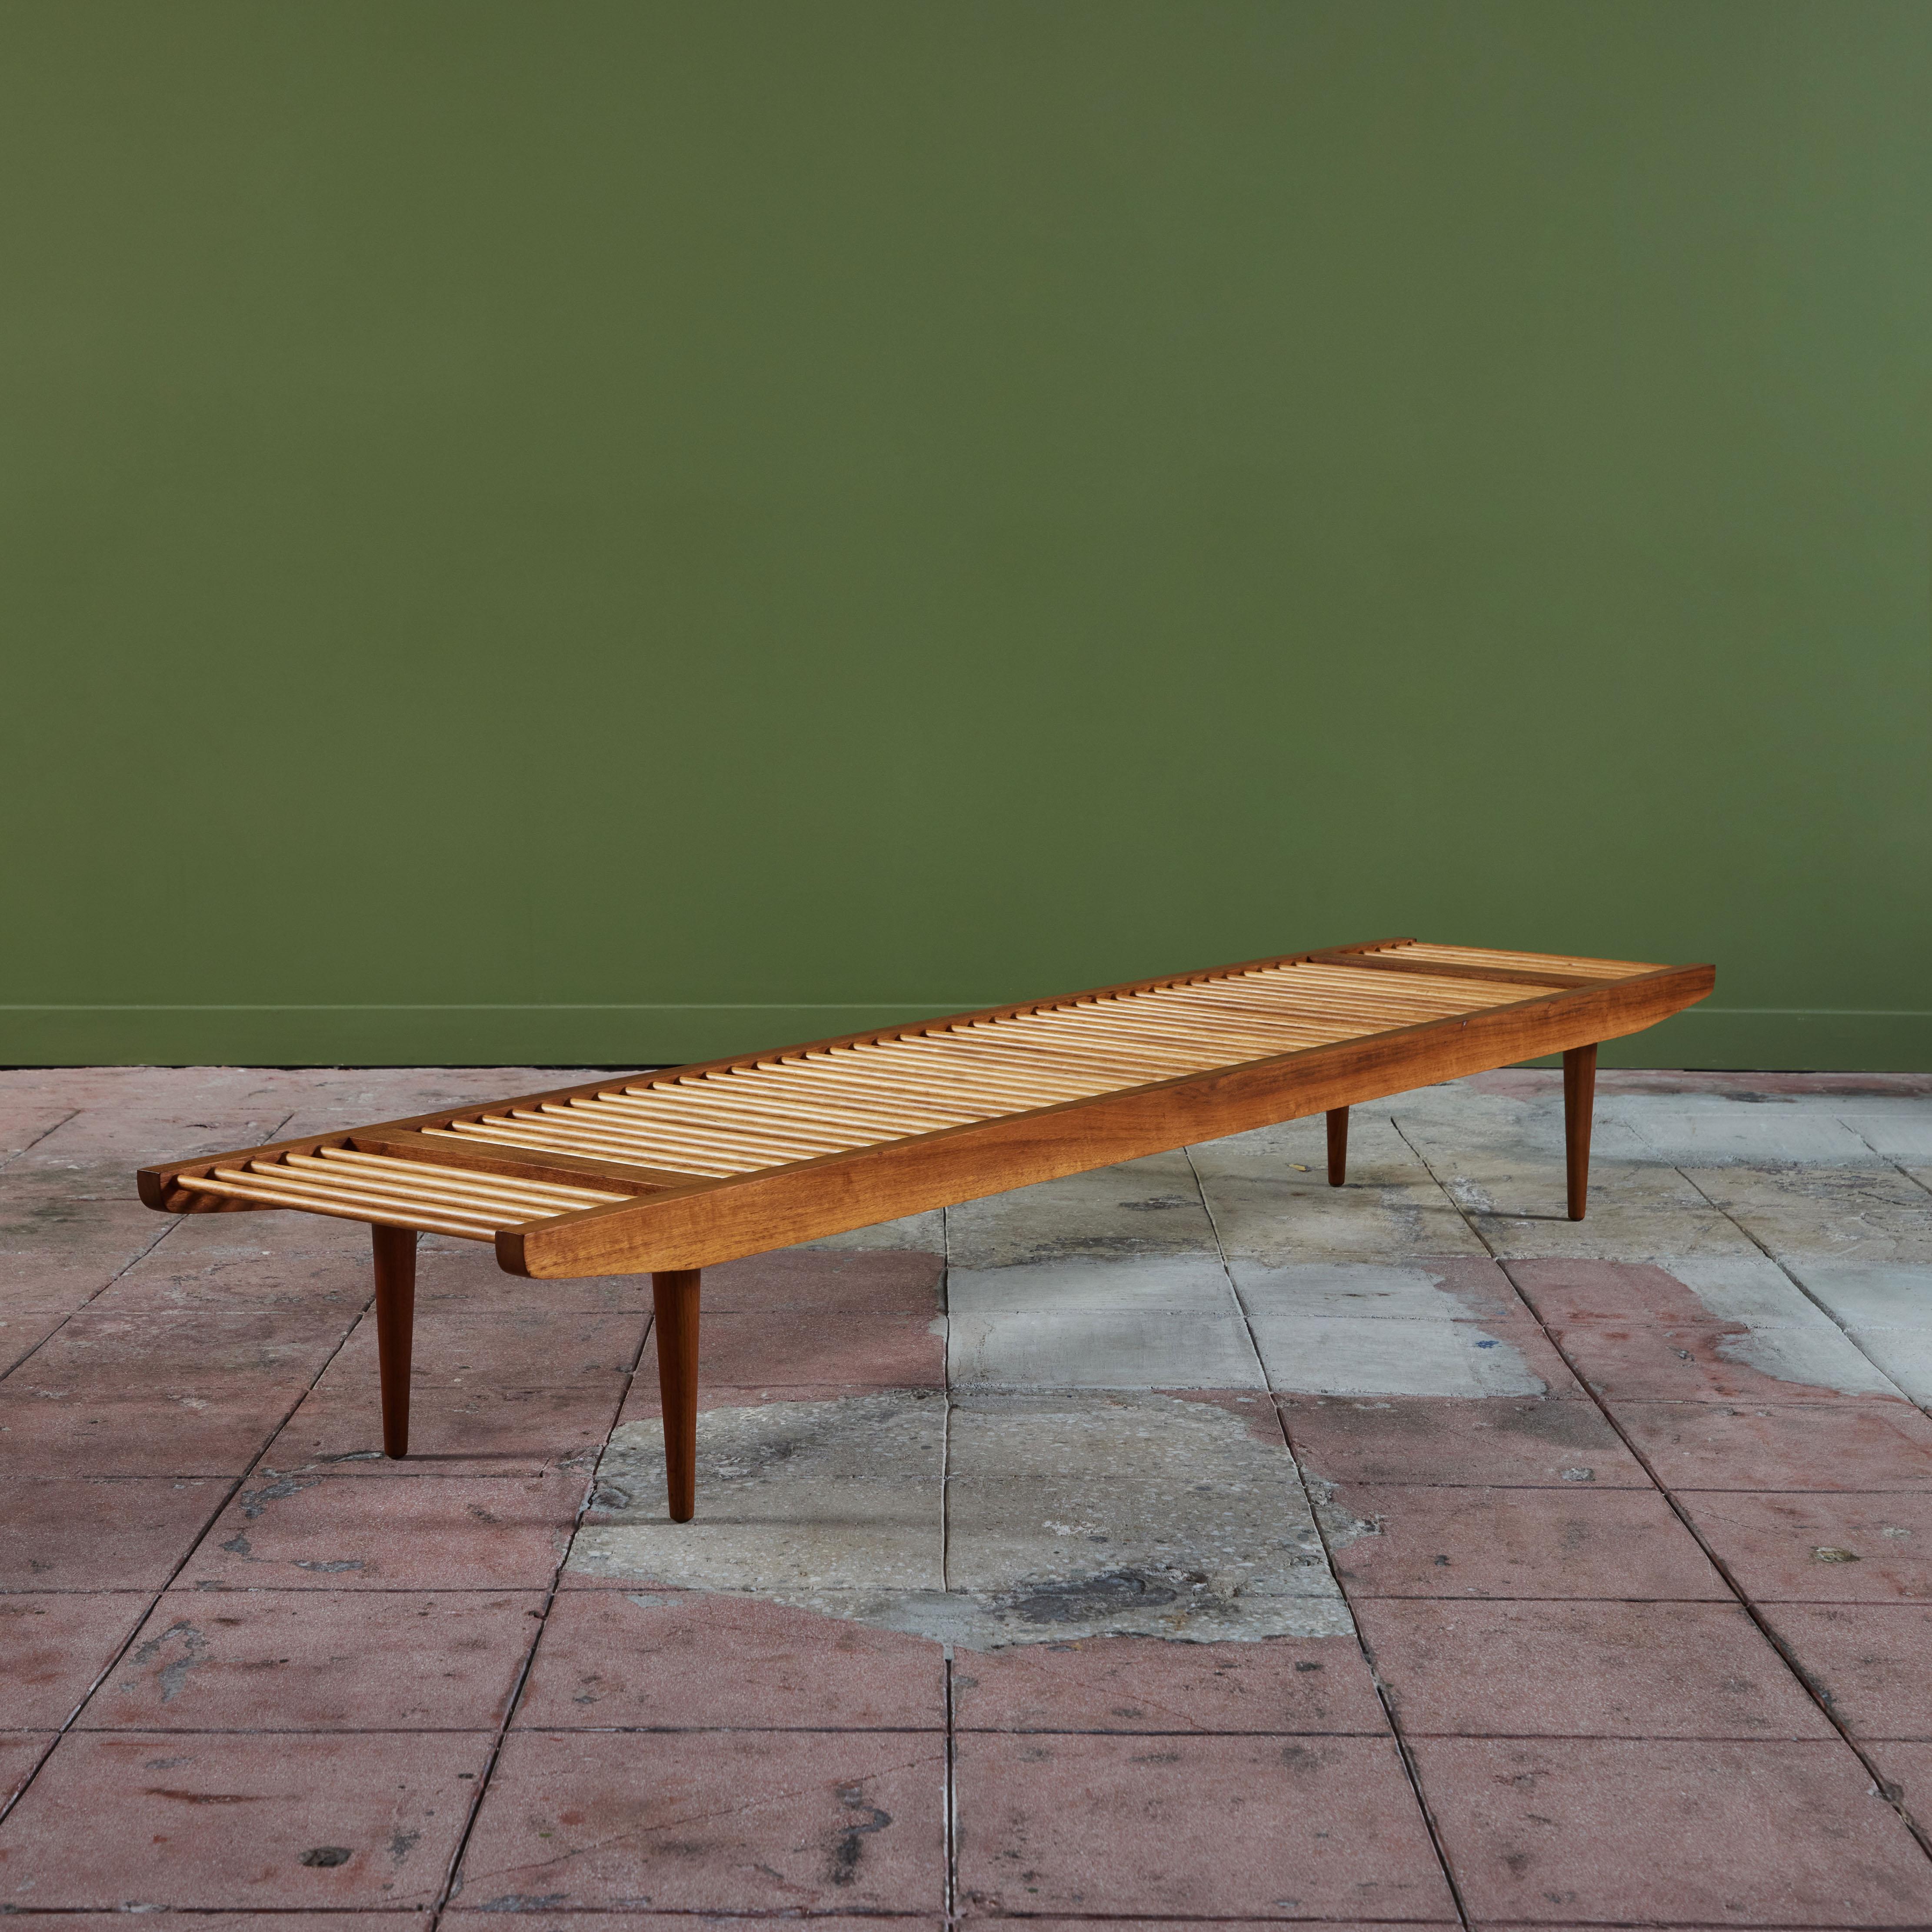 A multifunctional piece designed in the 1950s by Milo Baughman for Glenn of California. Most commonly seen as a bench, the piece has a walnut frame that tapers towards each end with walnut spacers and delicate rounded legs. The seat is created from